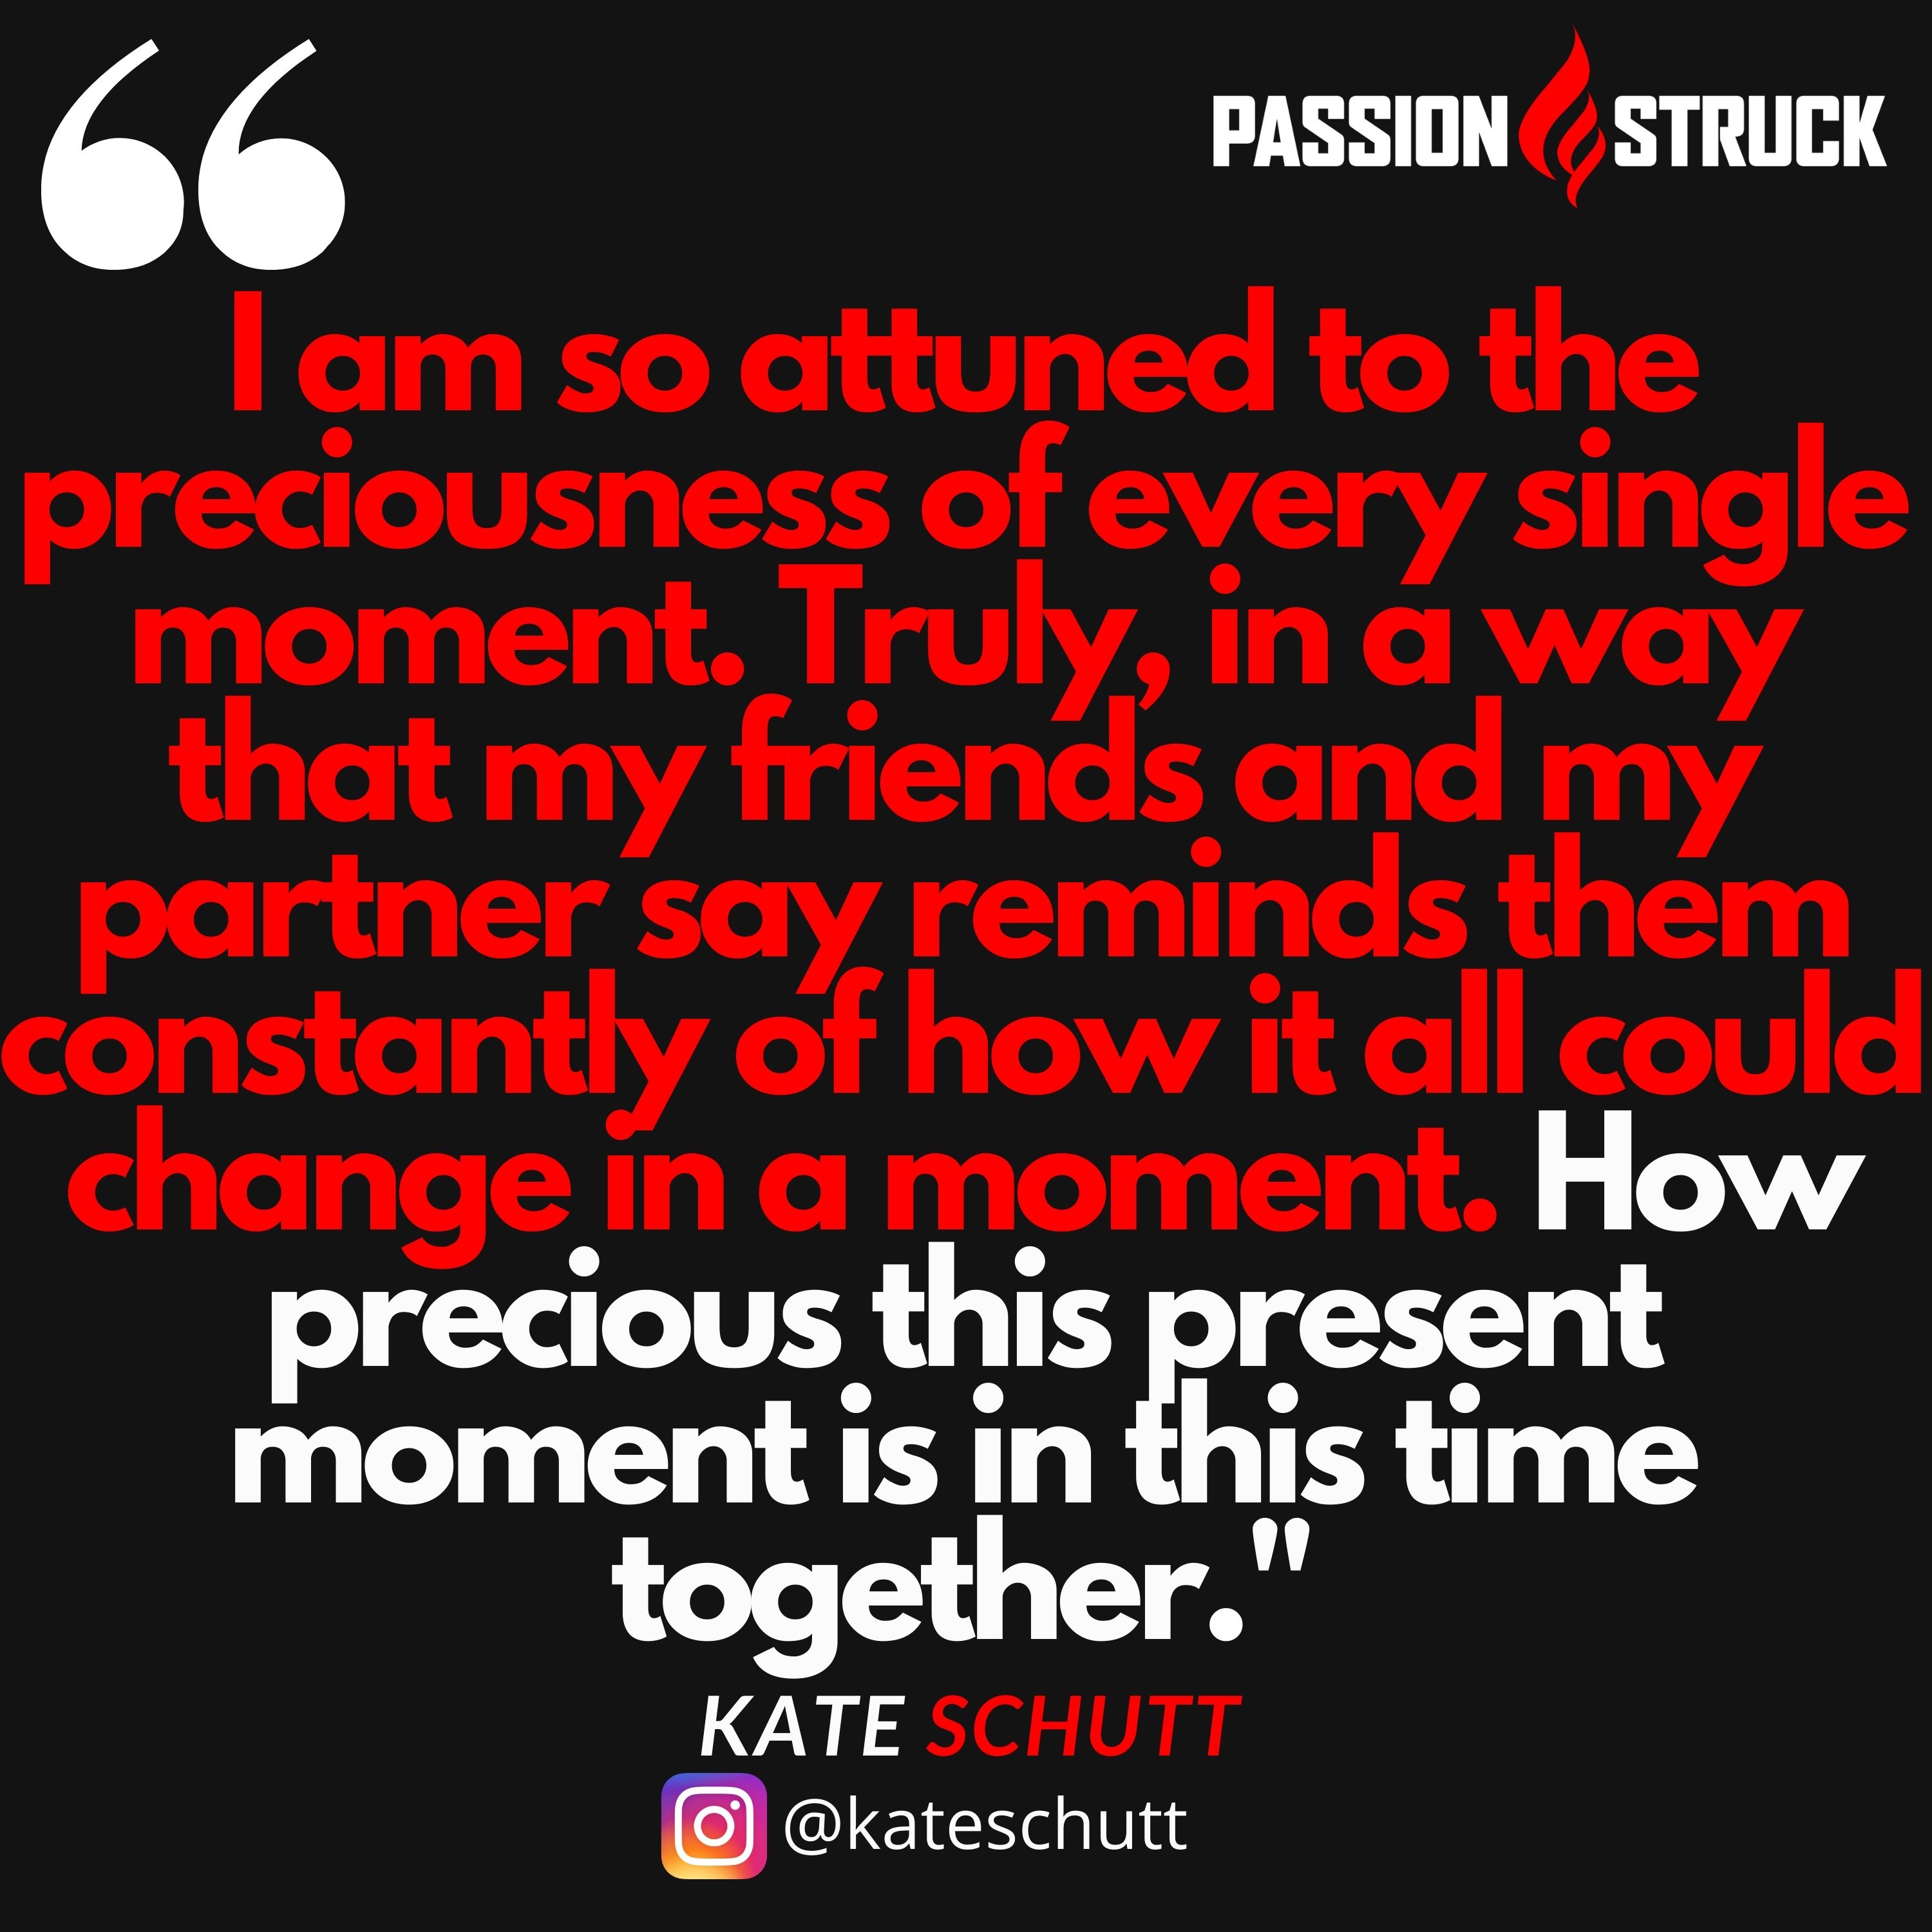 Kate Schutt quote on the preciousness of life